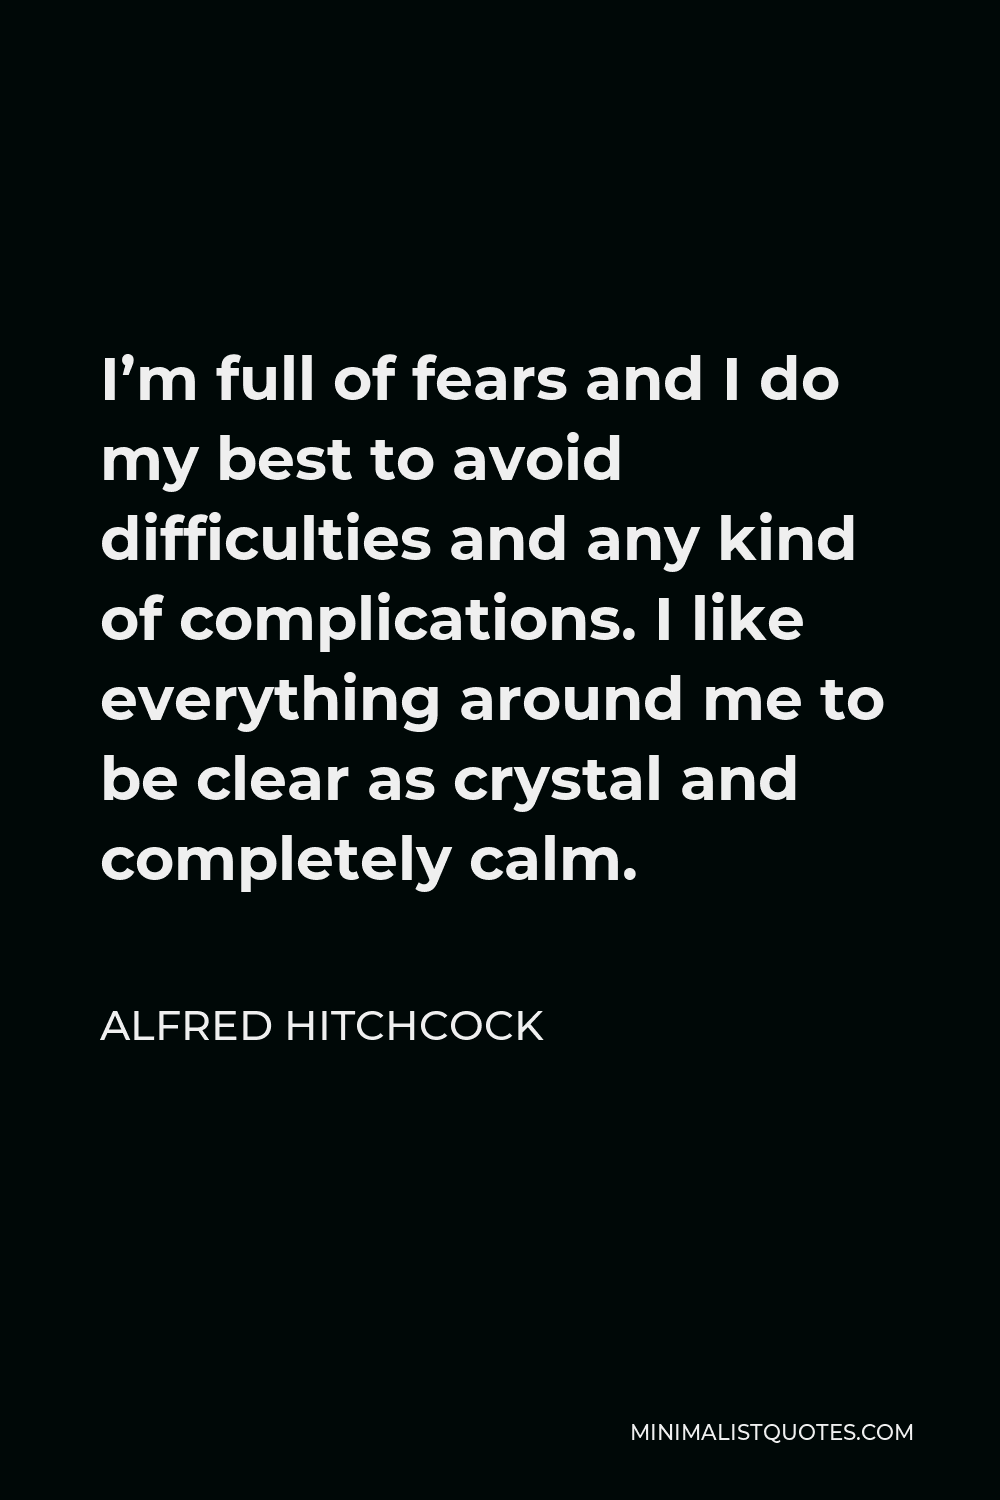 Alfred Hitchcock Quote - I’m full of fears and I do my best to avoid difficulties and any kind of complications. I like everything around me to be clear as crystal and completely calm.